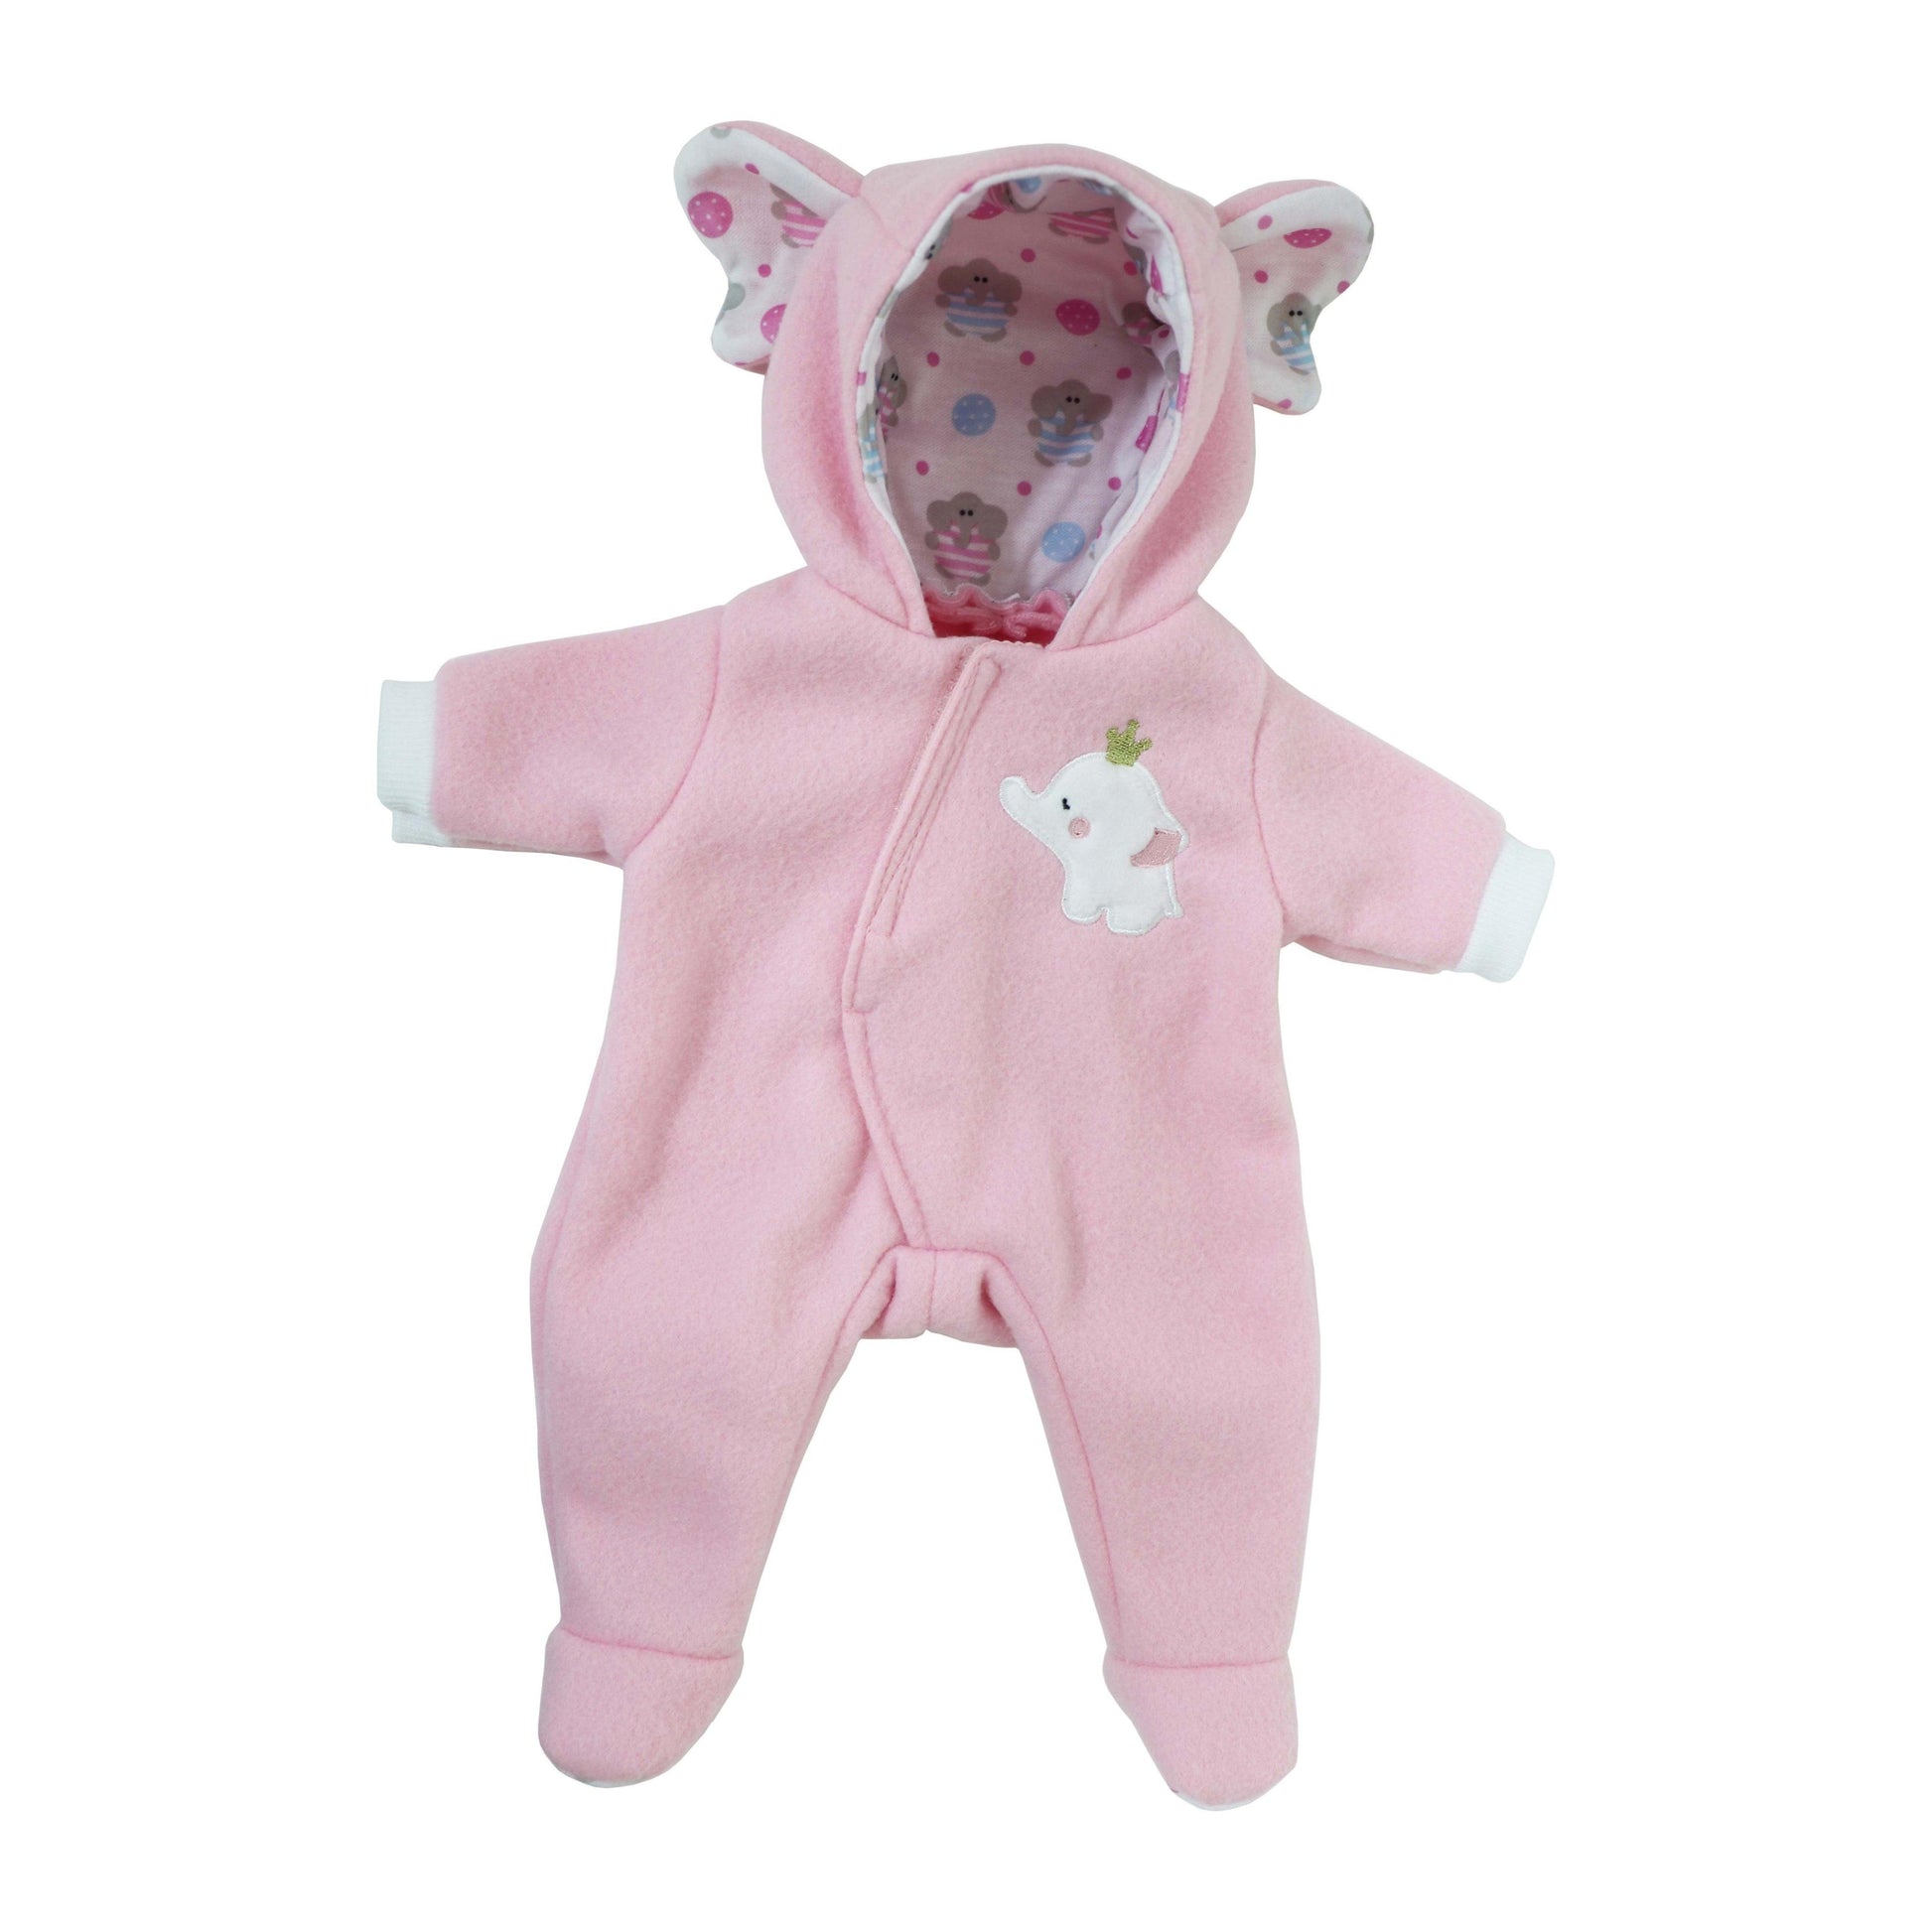 JC Toys Berenguer Boutique Baby Doll Outfit Pink Elephant Themed Hooded Onesie Fits dolls 14"- 18" - JC Toys Group Inc.